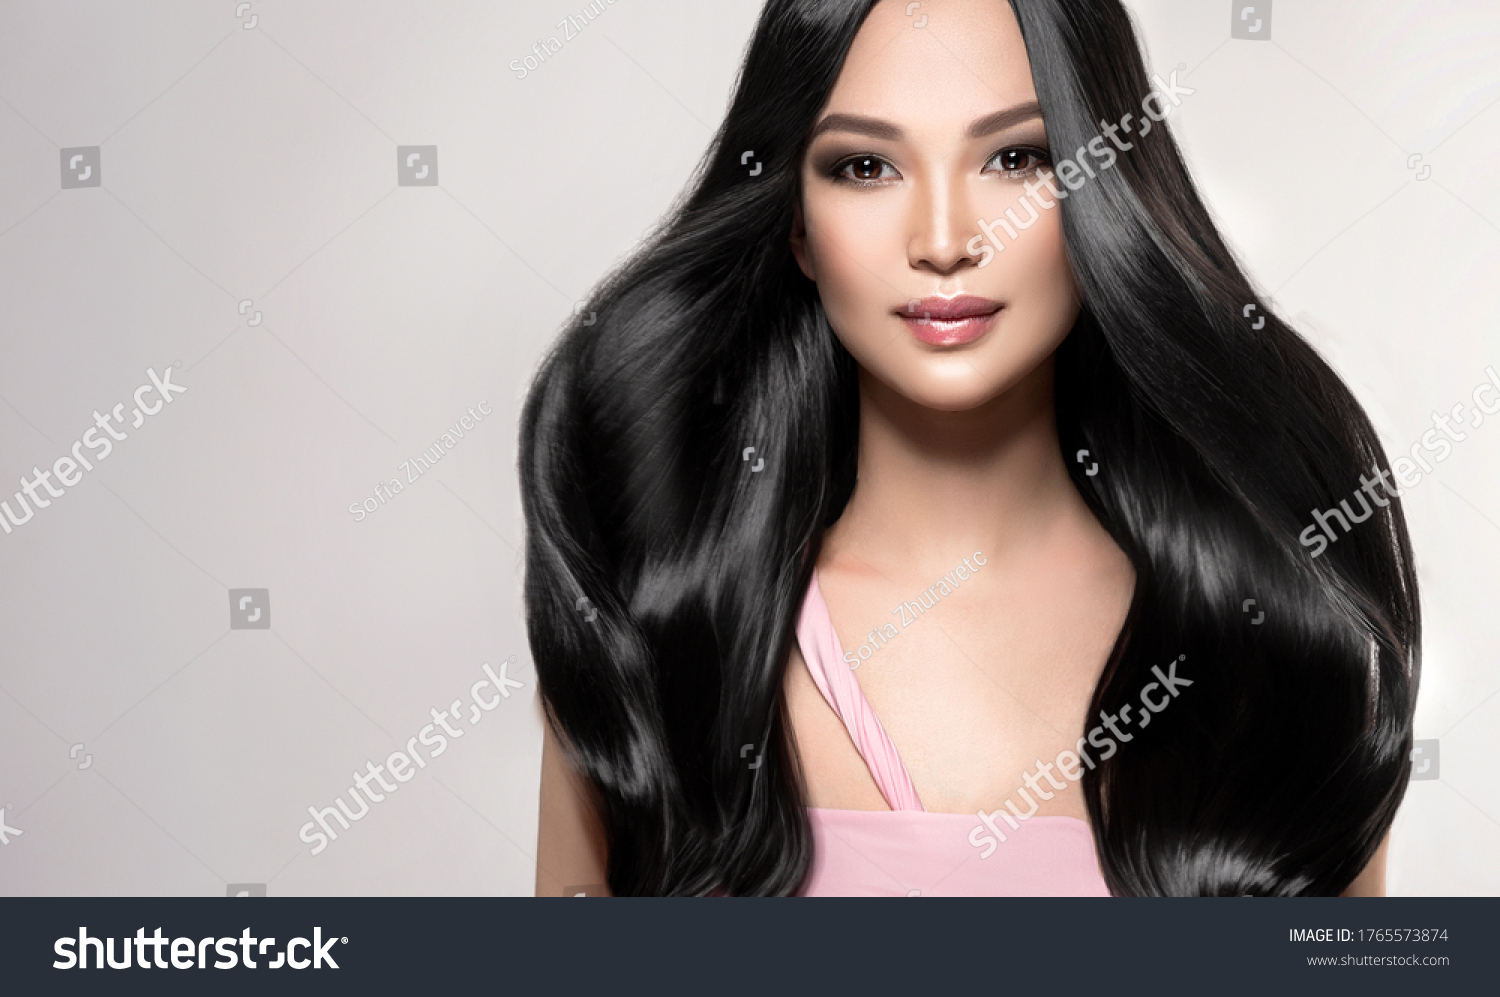 Beautiful asian model girl with shiny black and straight long hair . Keratin straightening . Treatment, care and spa procedures for hair . Chinese girl with smooth hairstyle #1765573874